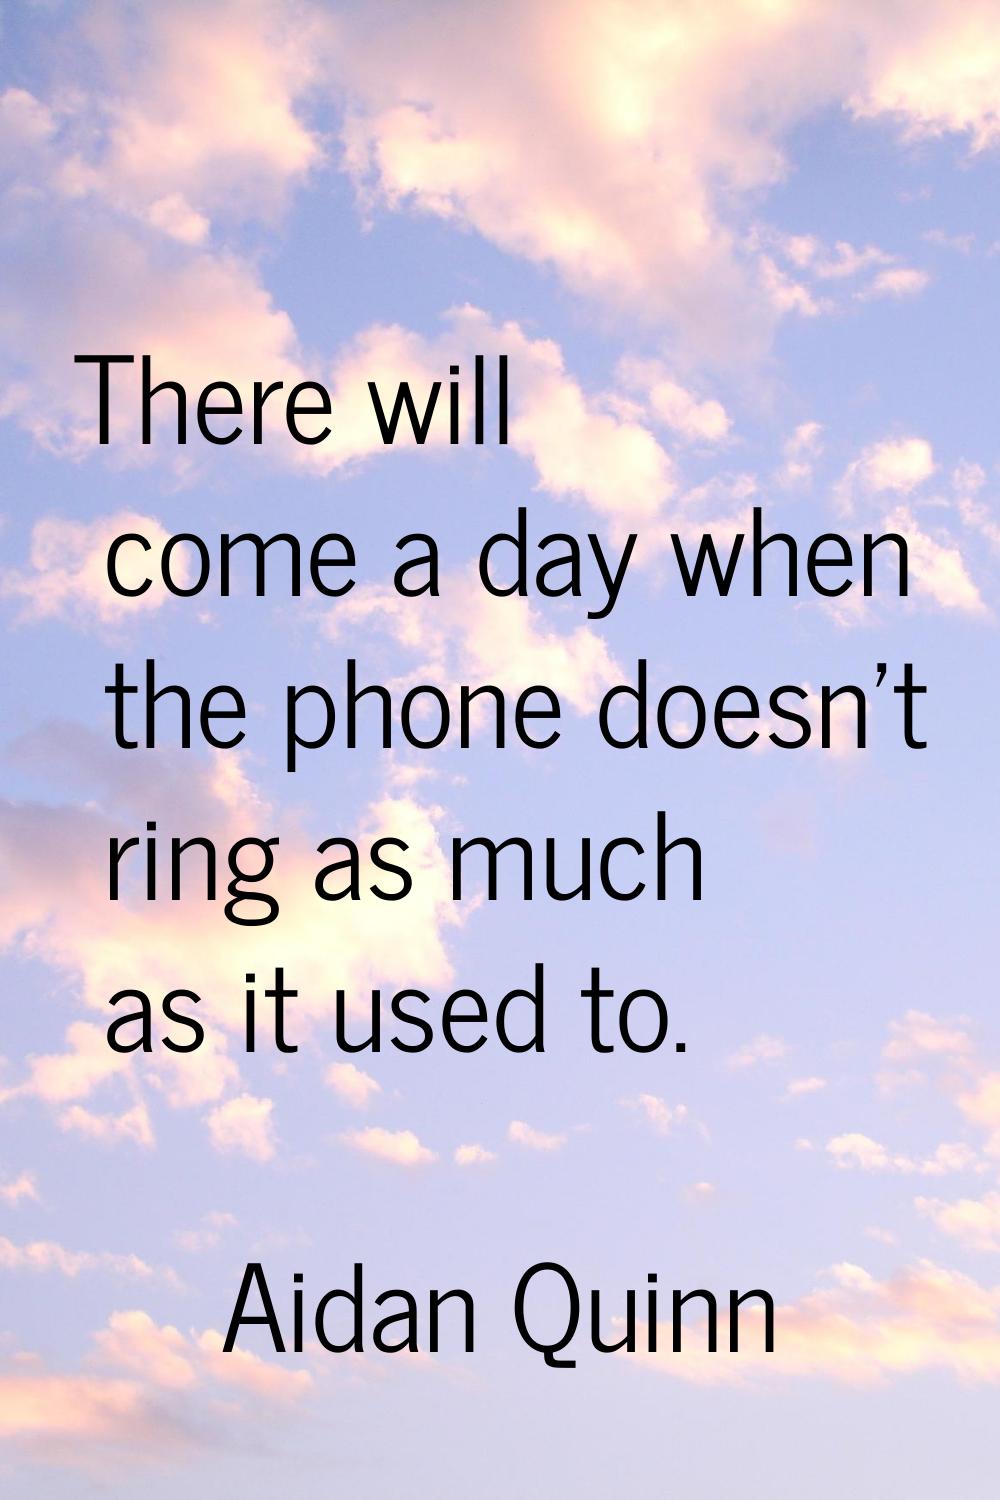 There will come a day when the phone doesn't ring as much as it used to.